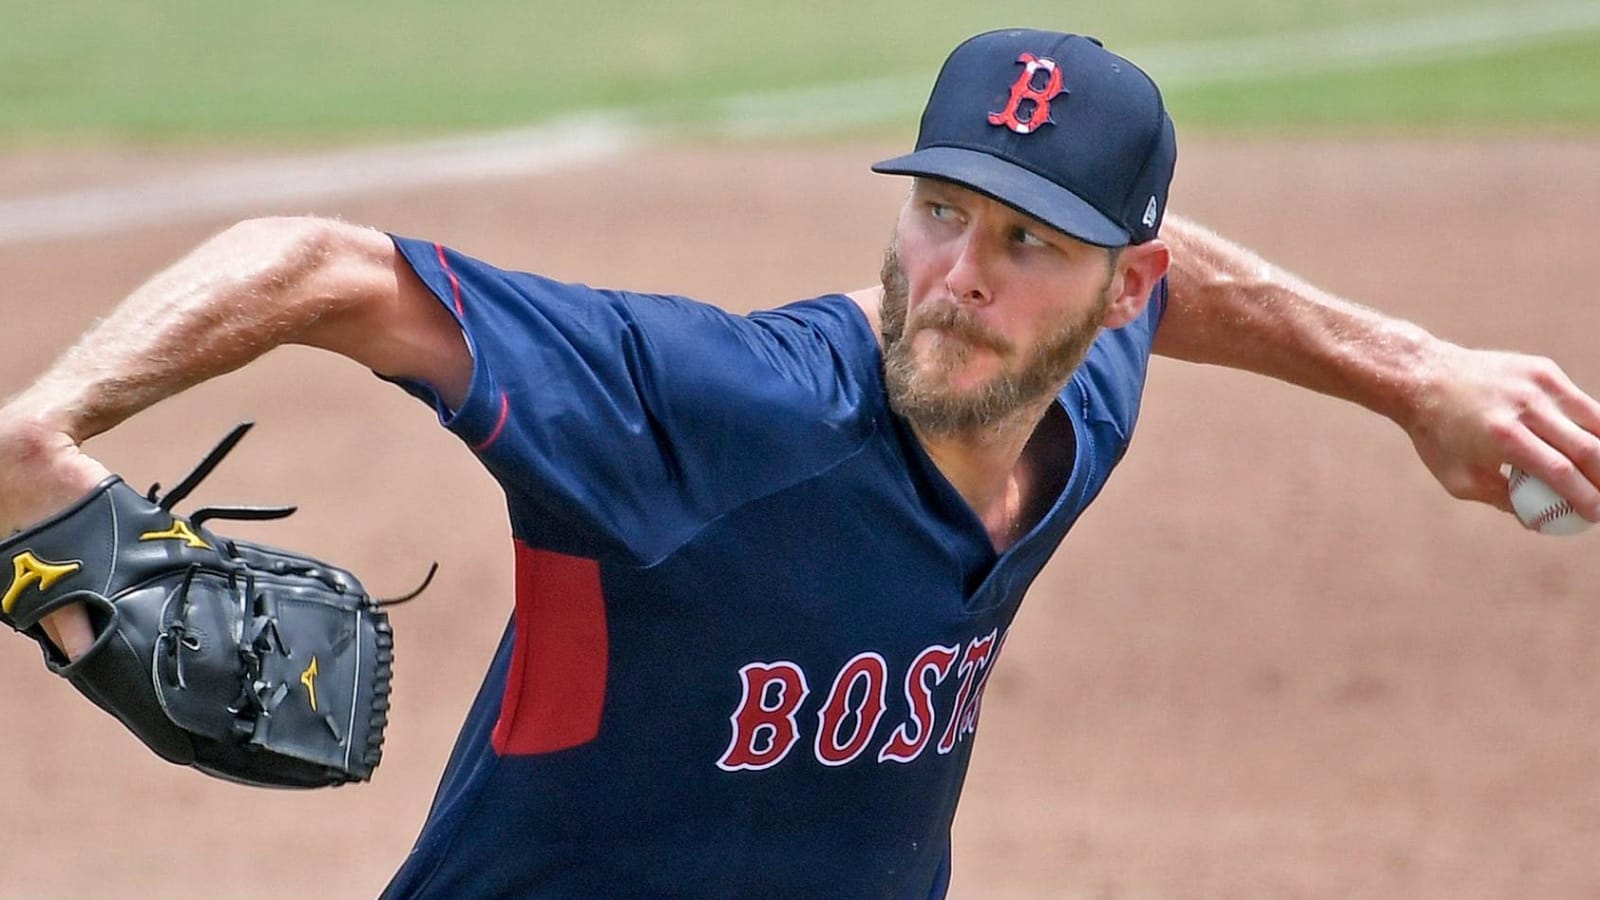 Chris Sale made major dietary changes during rehabilitation